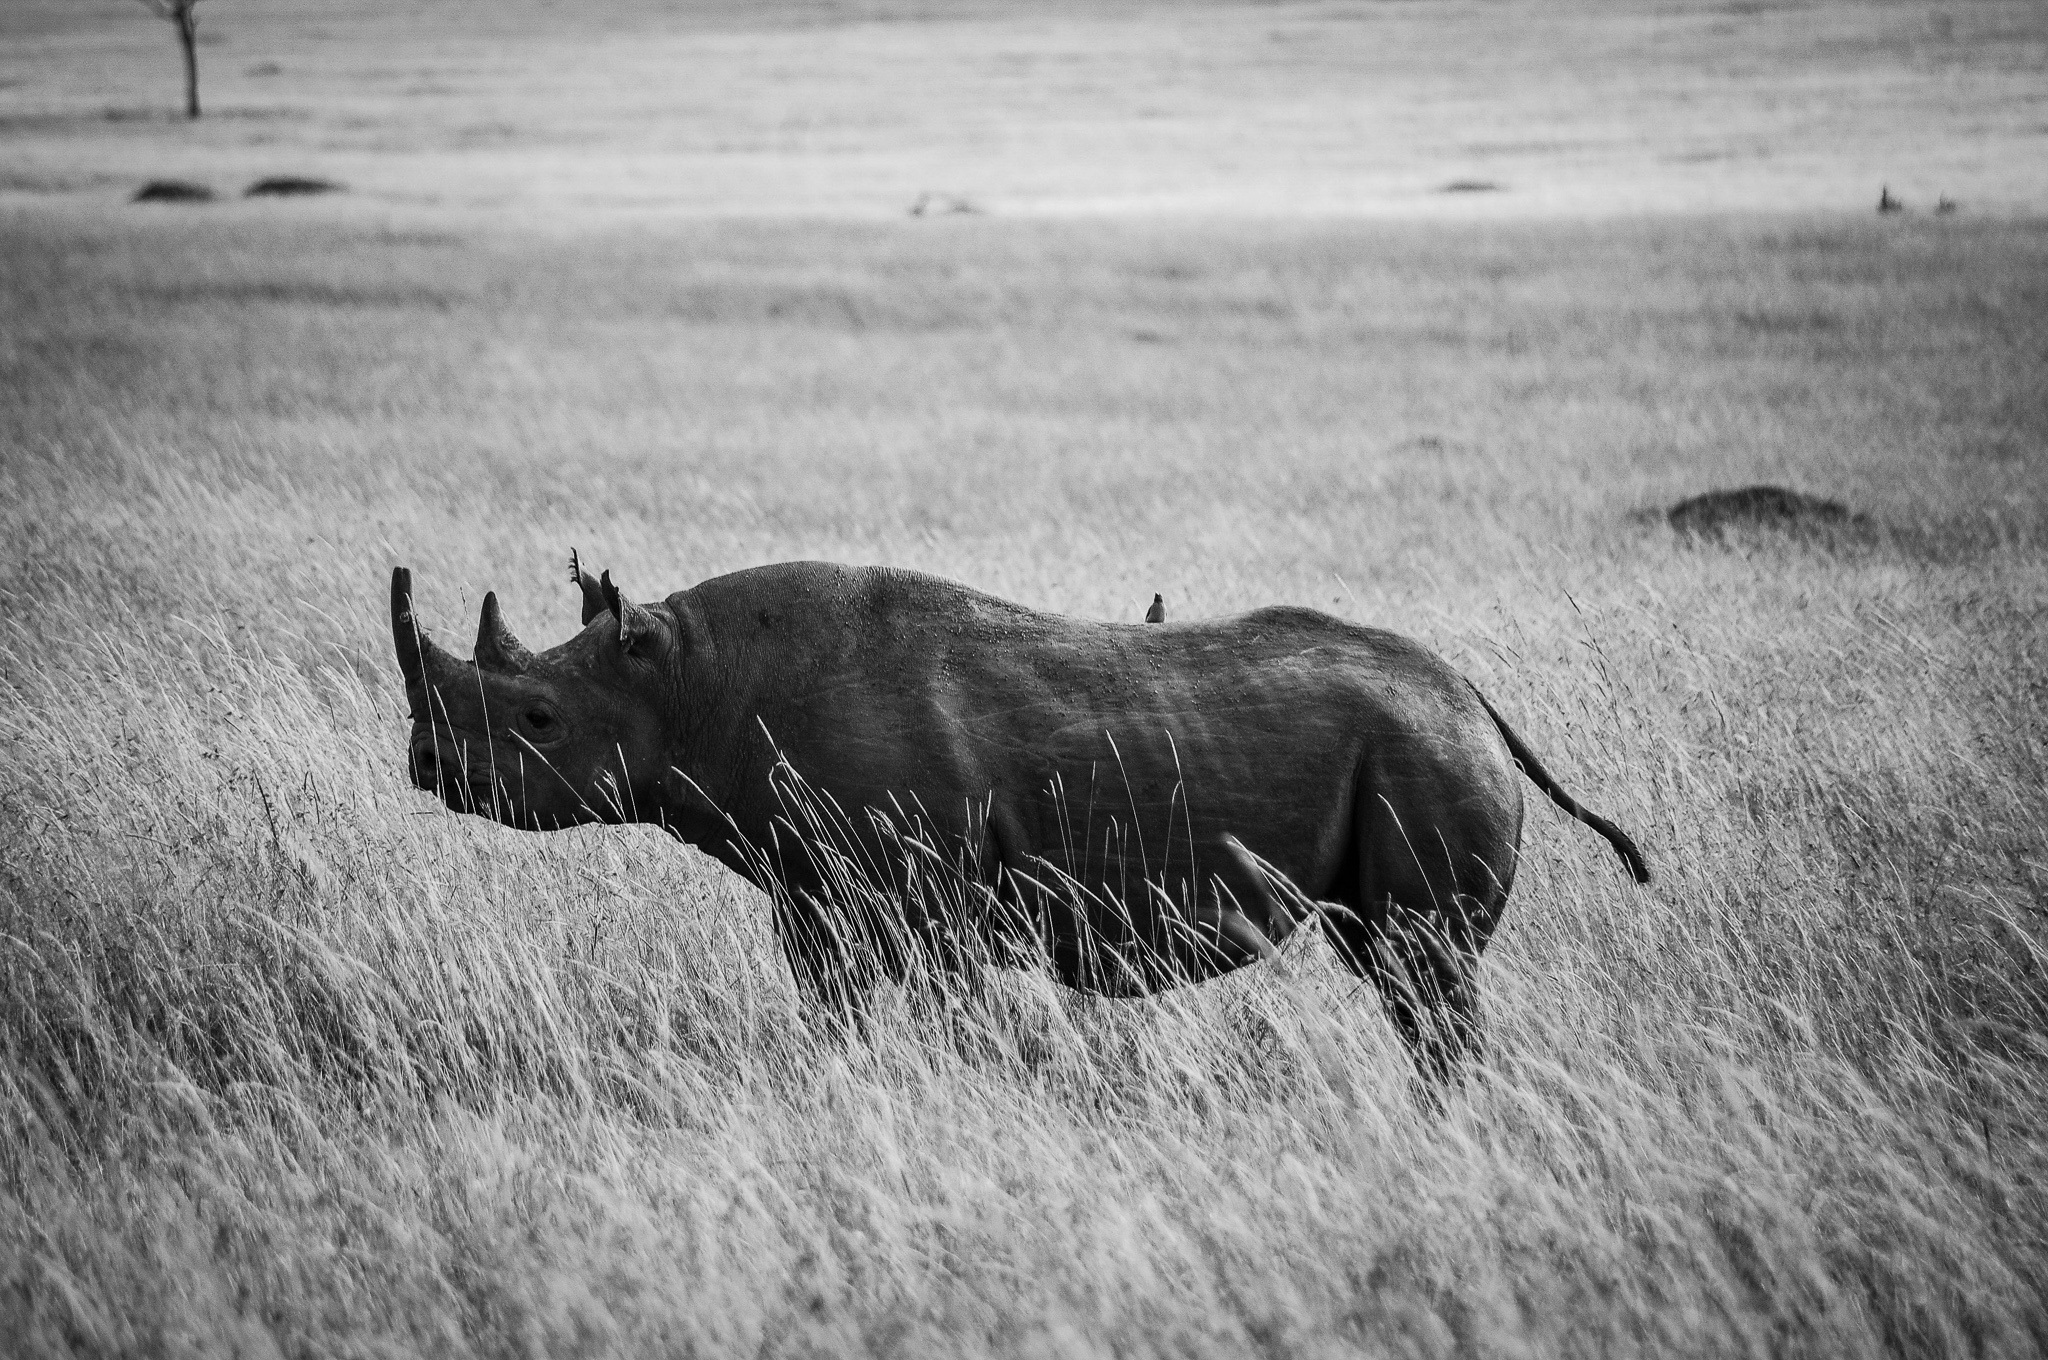 The fourth photo is of a lone male rhino grazing the plains of the Maasai Mara. I was beyond lucky to capture this shot since a rhino hadn’t been spotted until my last day in the reserve. You can notice the sheer size of the rhino if you look at the little bird perched on its bouldering back. 